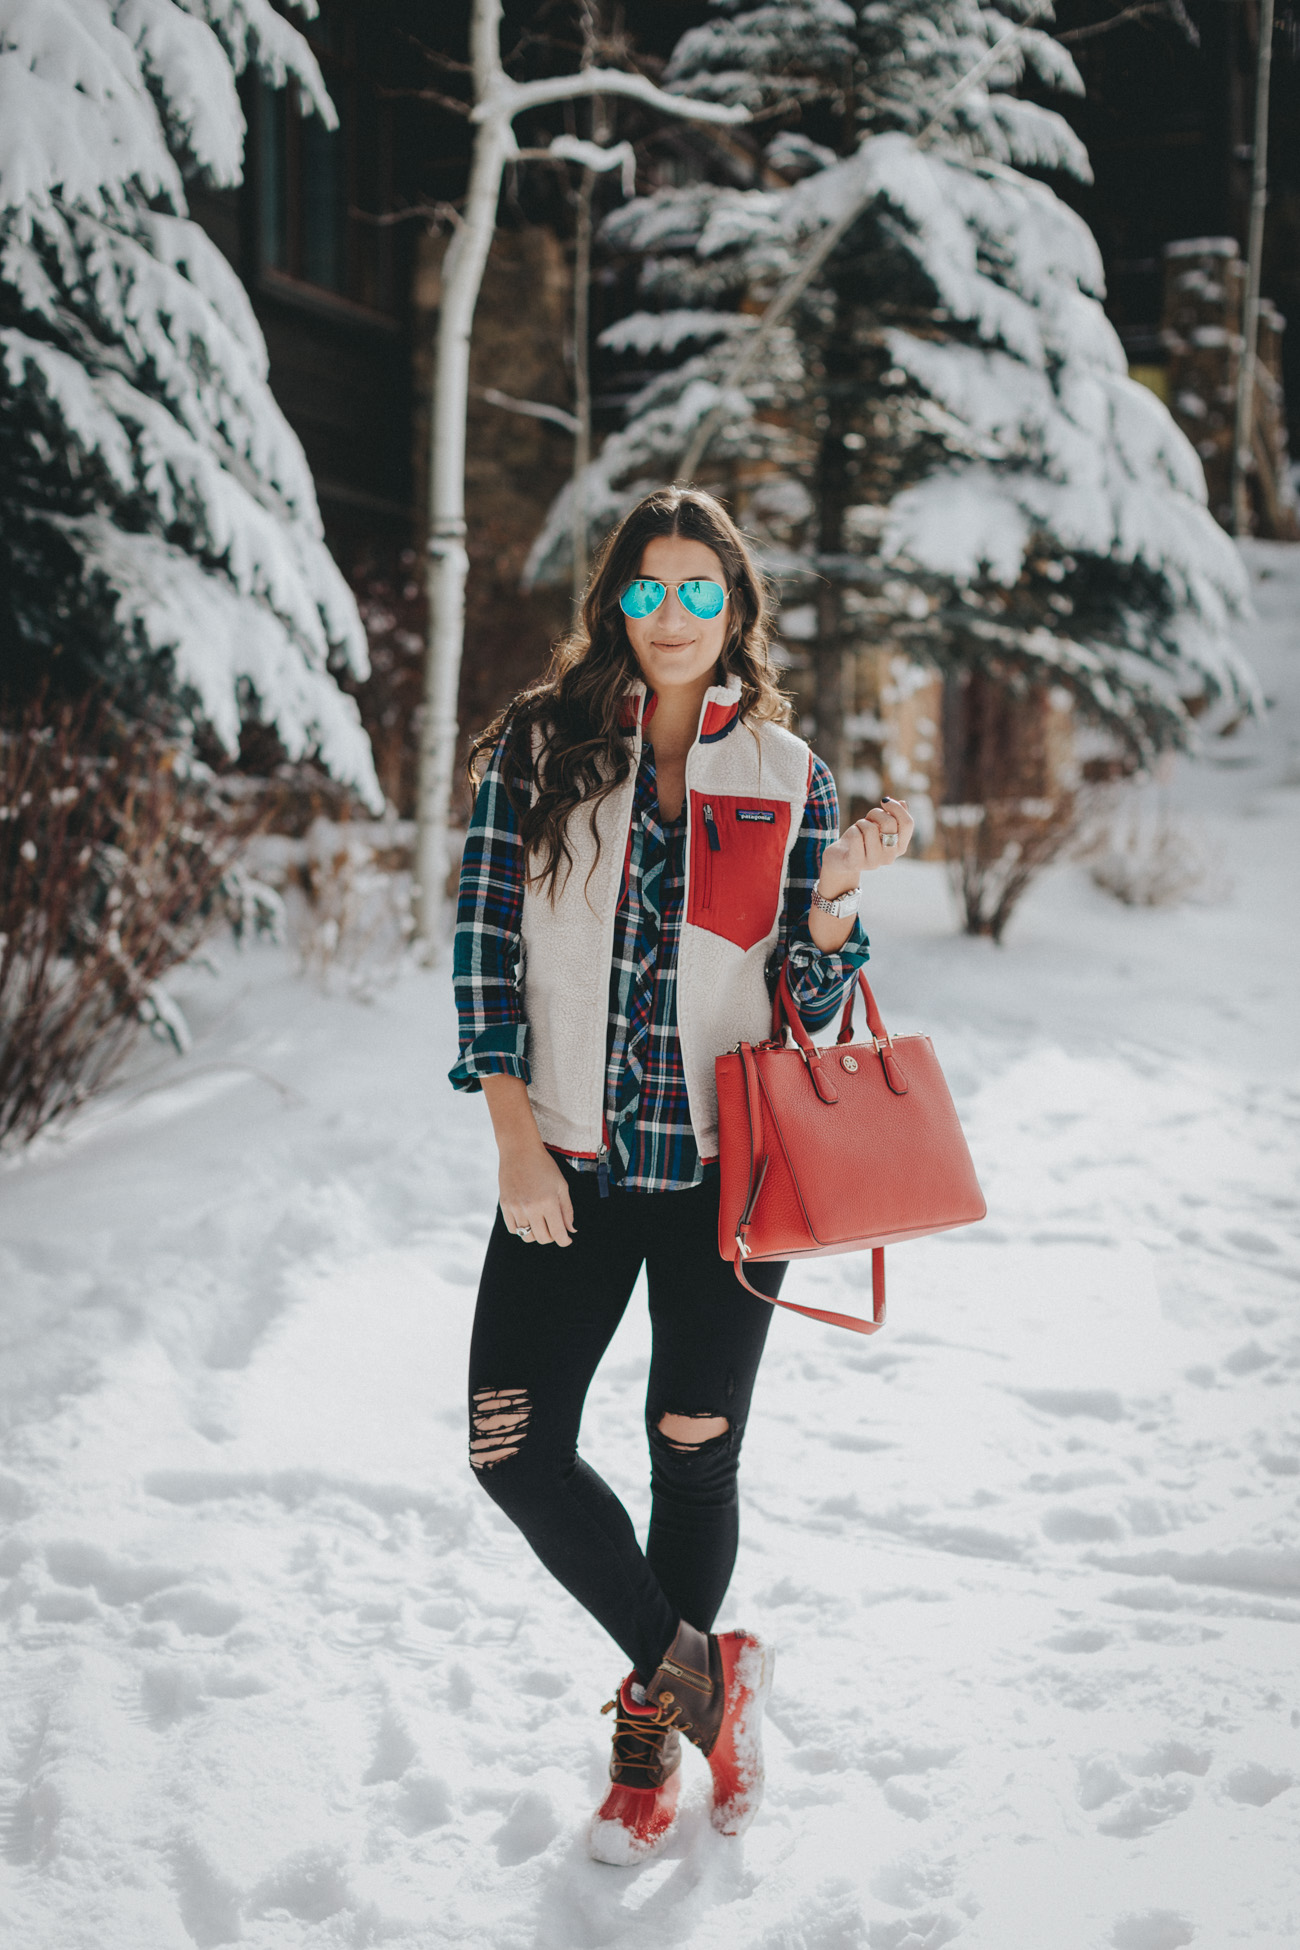 patagonia classic retro x fleece vest, patagonia vest, patagonia fleece vest, plaid flannel shirt, red duckboots, duck boots, bean boots, sperry duck boots, colorado style, snow style, snow outfit // grace wainwright a southern drawl